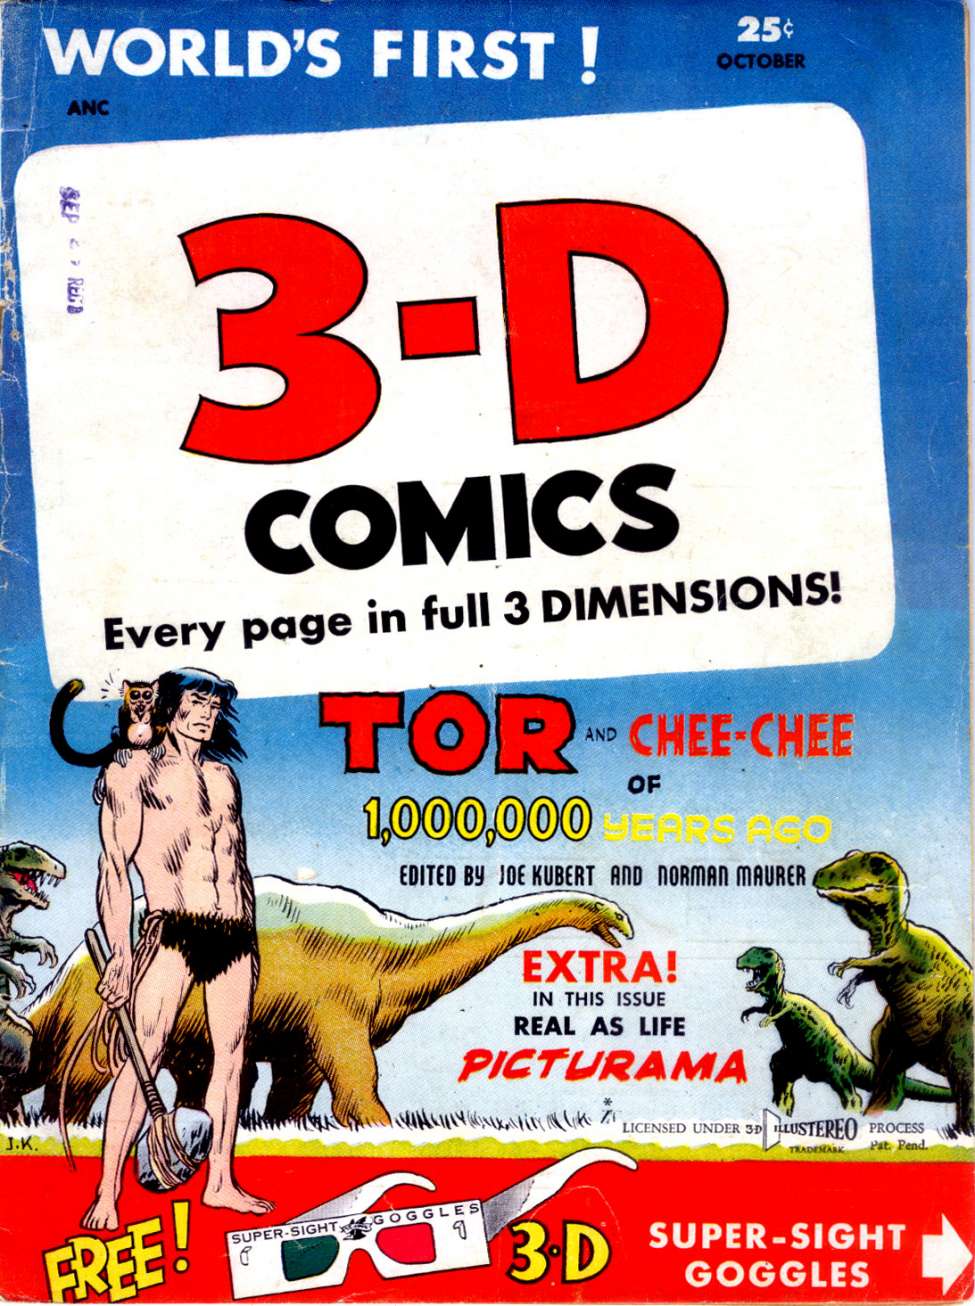 Book Cover For 3D Comics 2a Tor (b&w) - Version 3